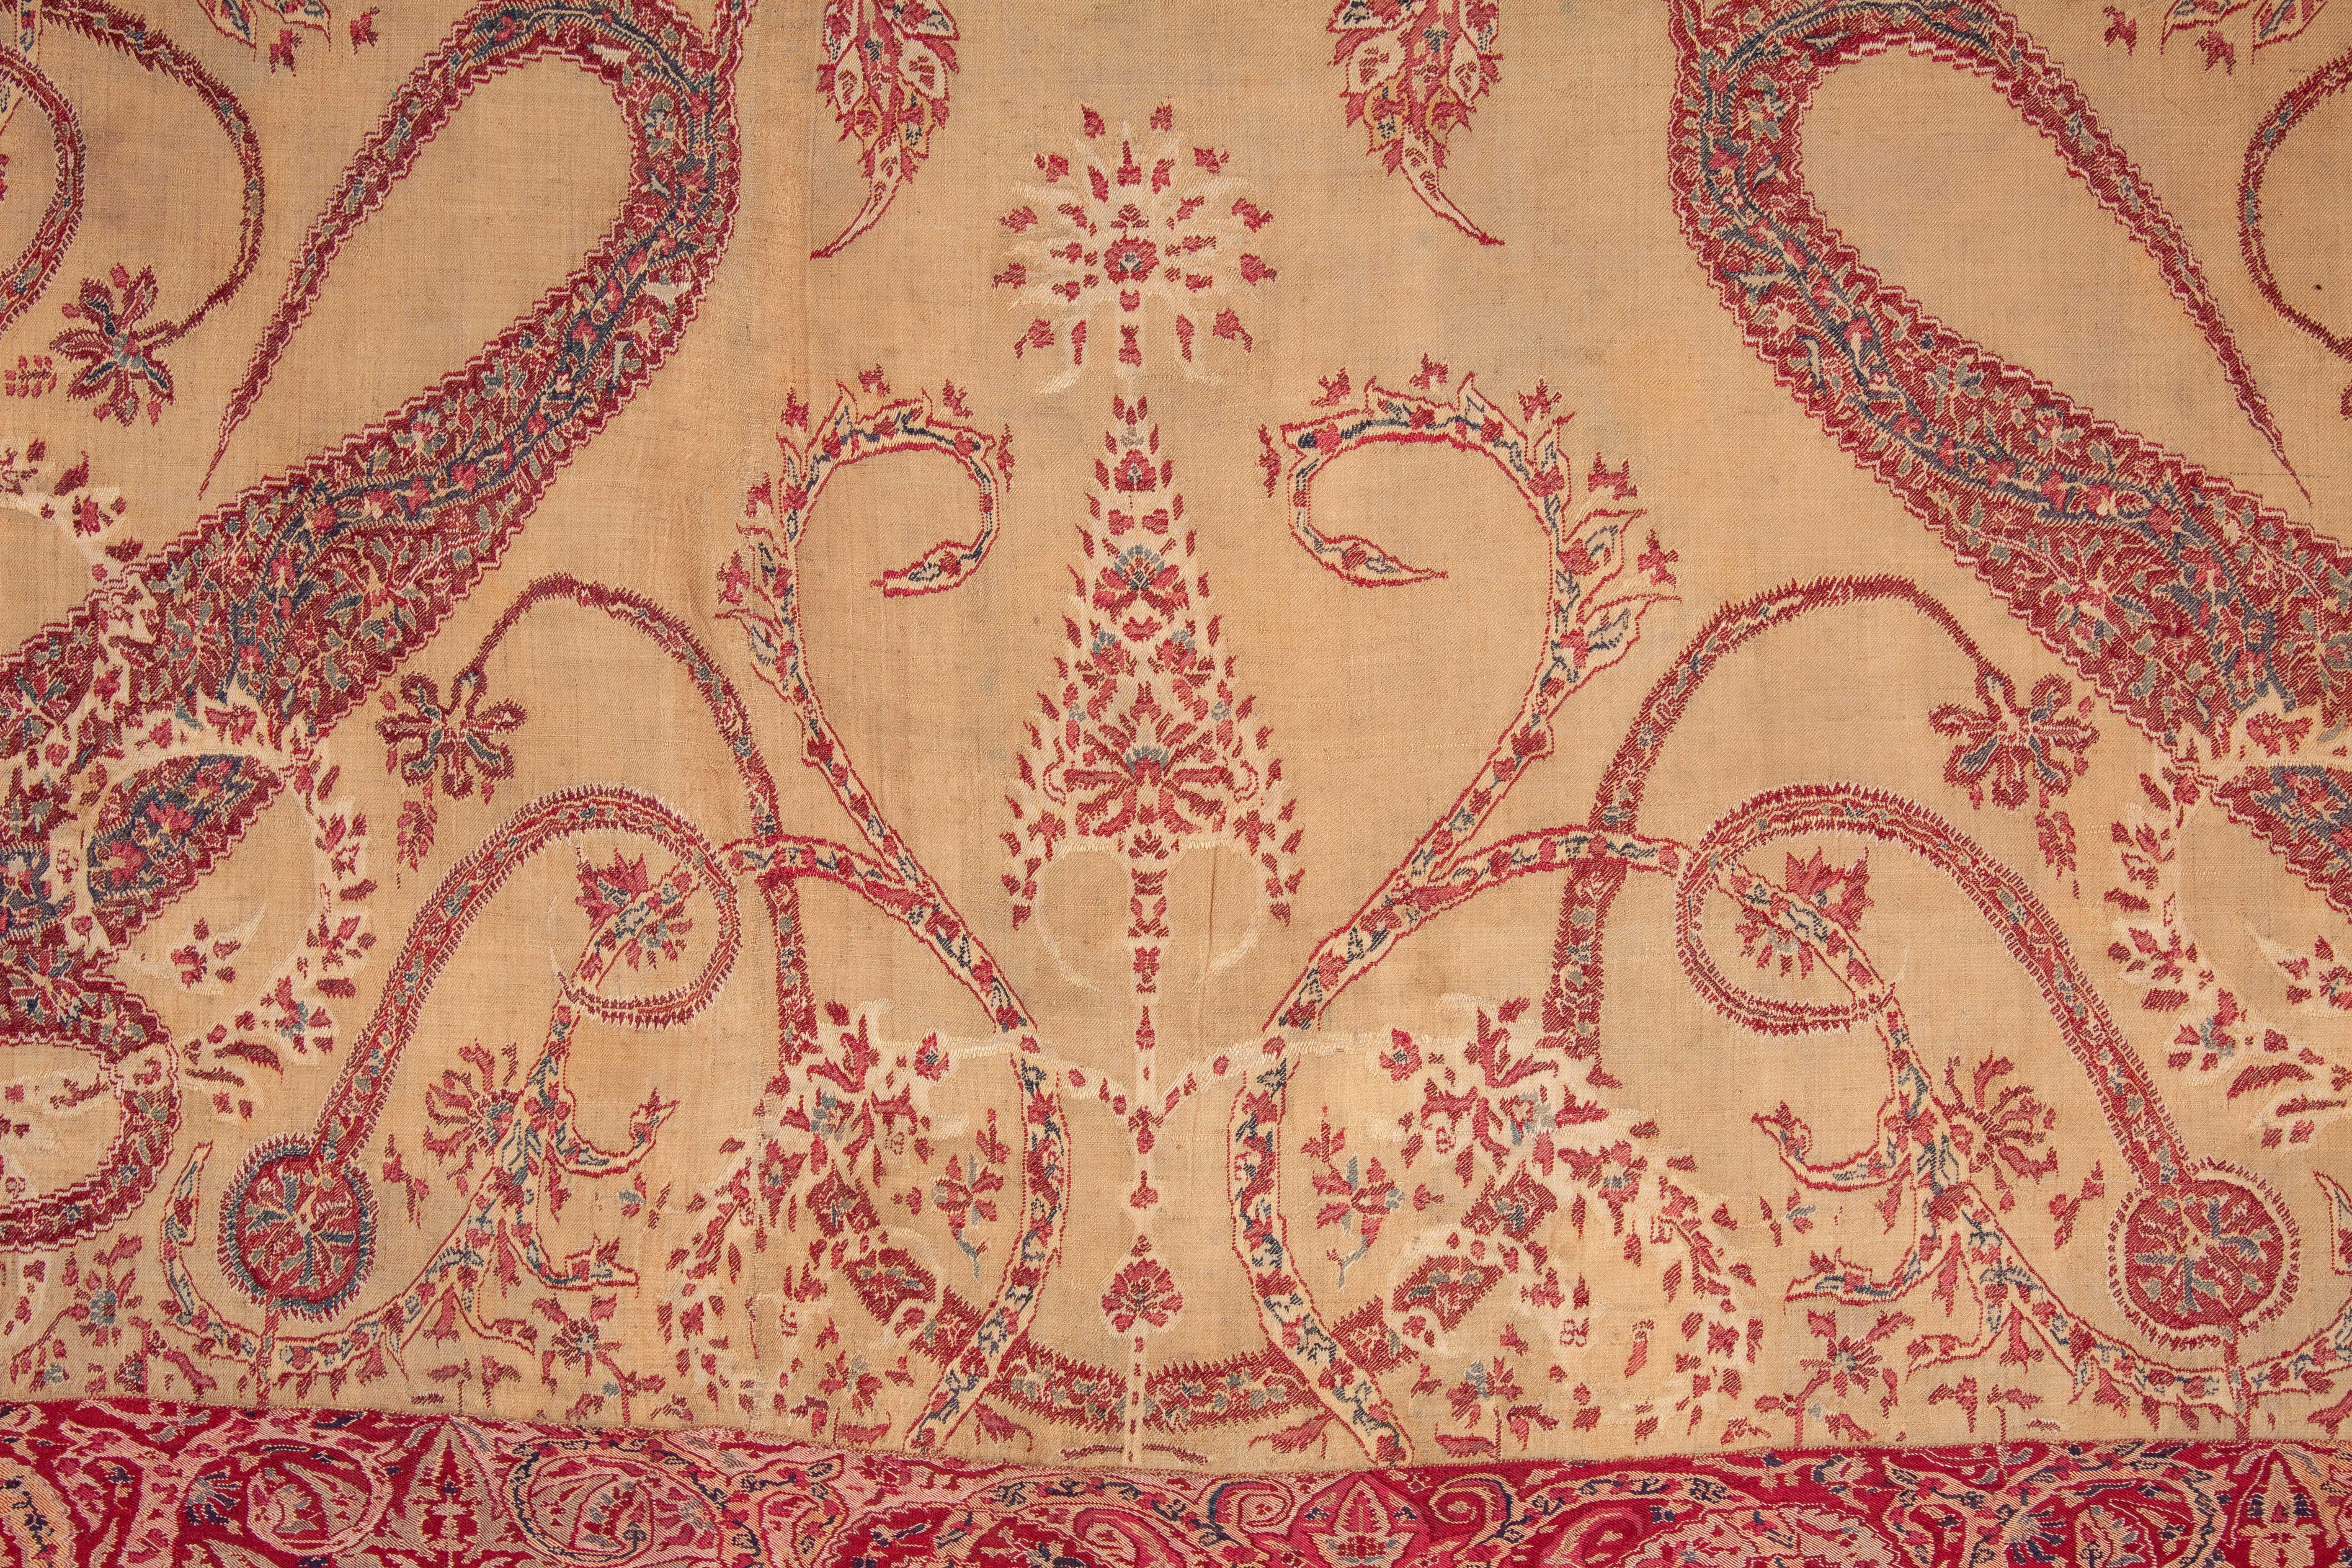 Hand-Woven Antique Kashmir Shawl from India, 19th Century